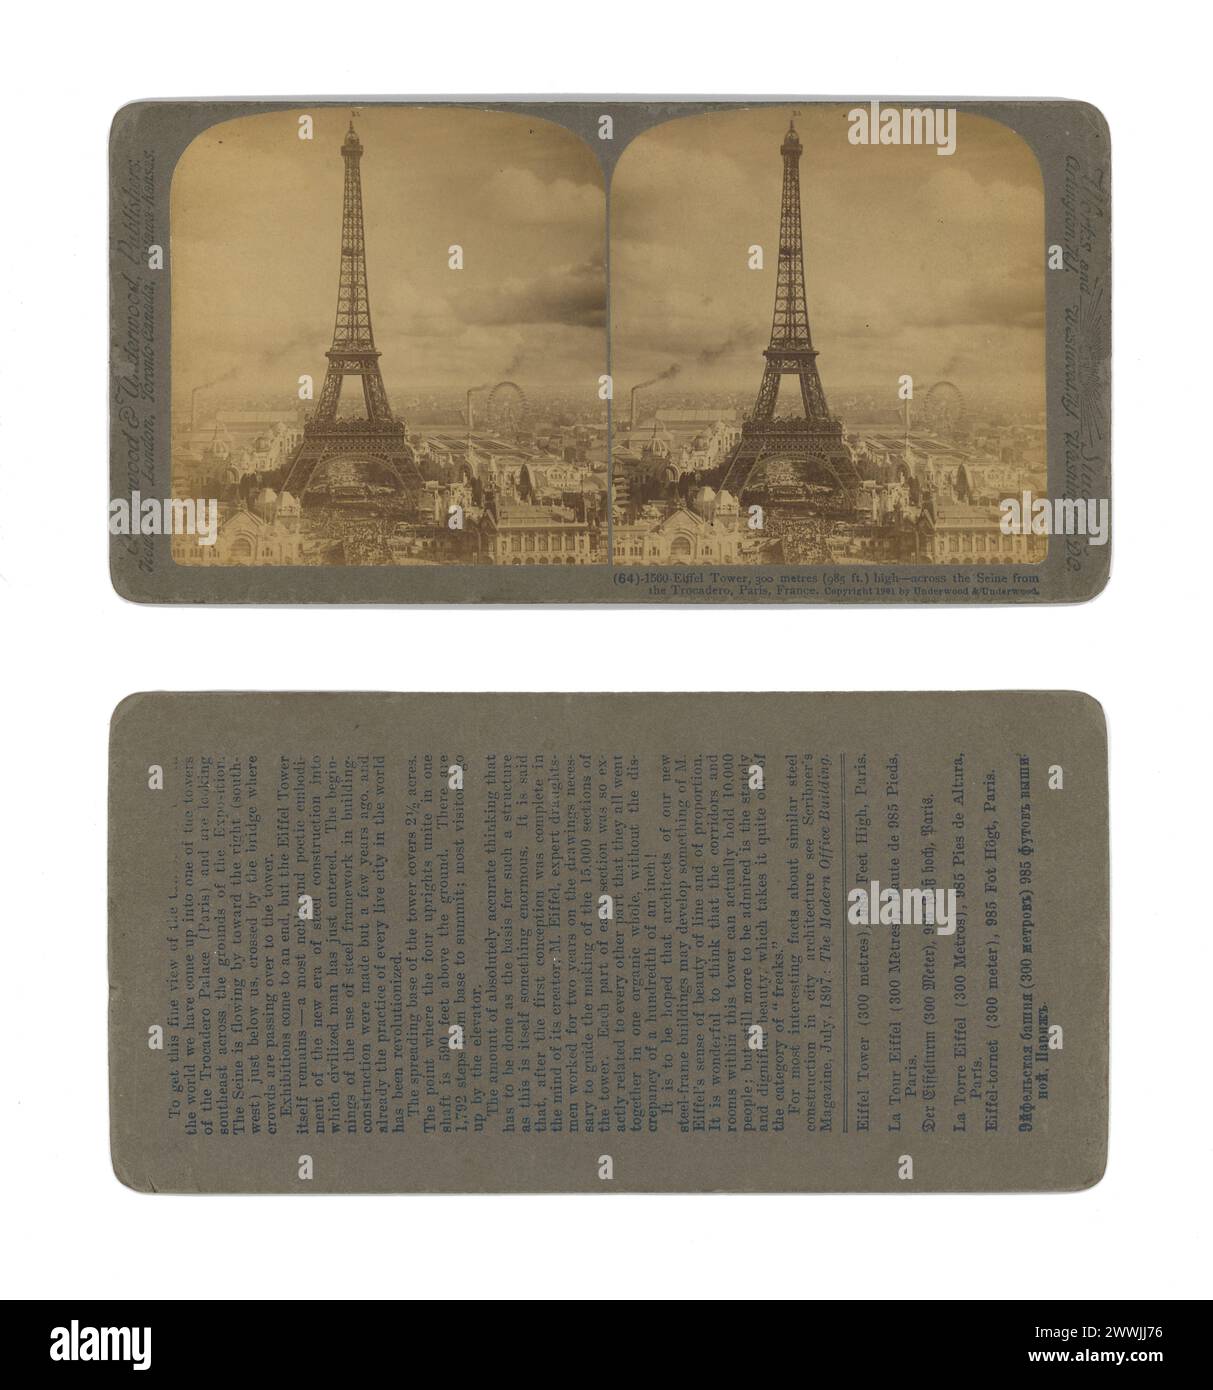 Vintage Stereograph of the Eiffel Tower in Paris France during the 1889 Exposition Universelle with La Grande Roue de Paris Ferris Wheel Stock Photo